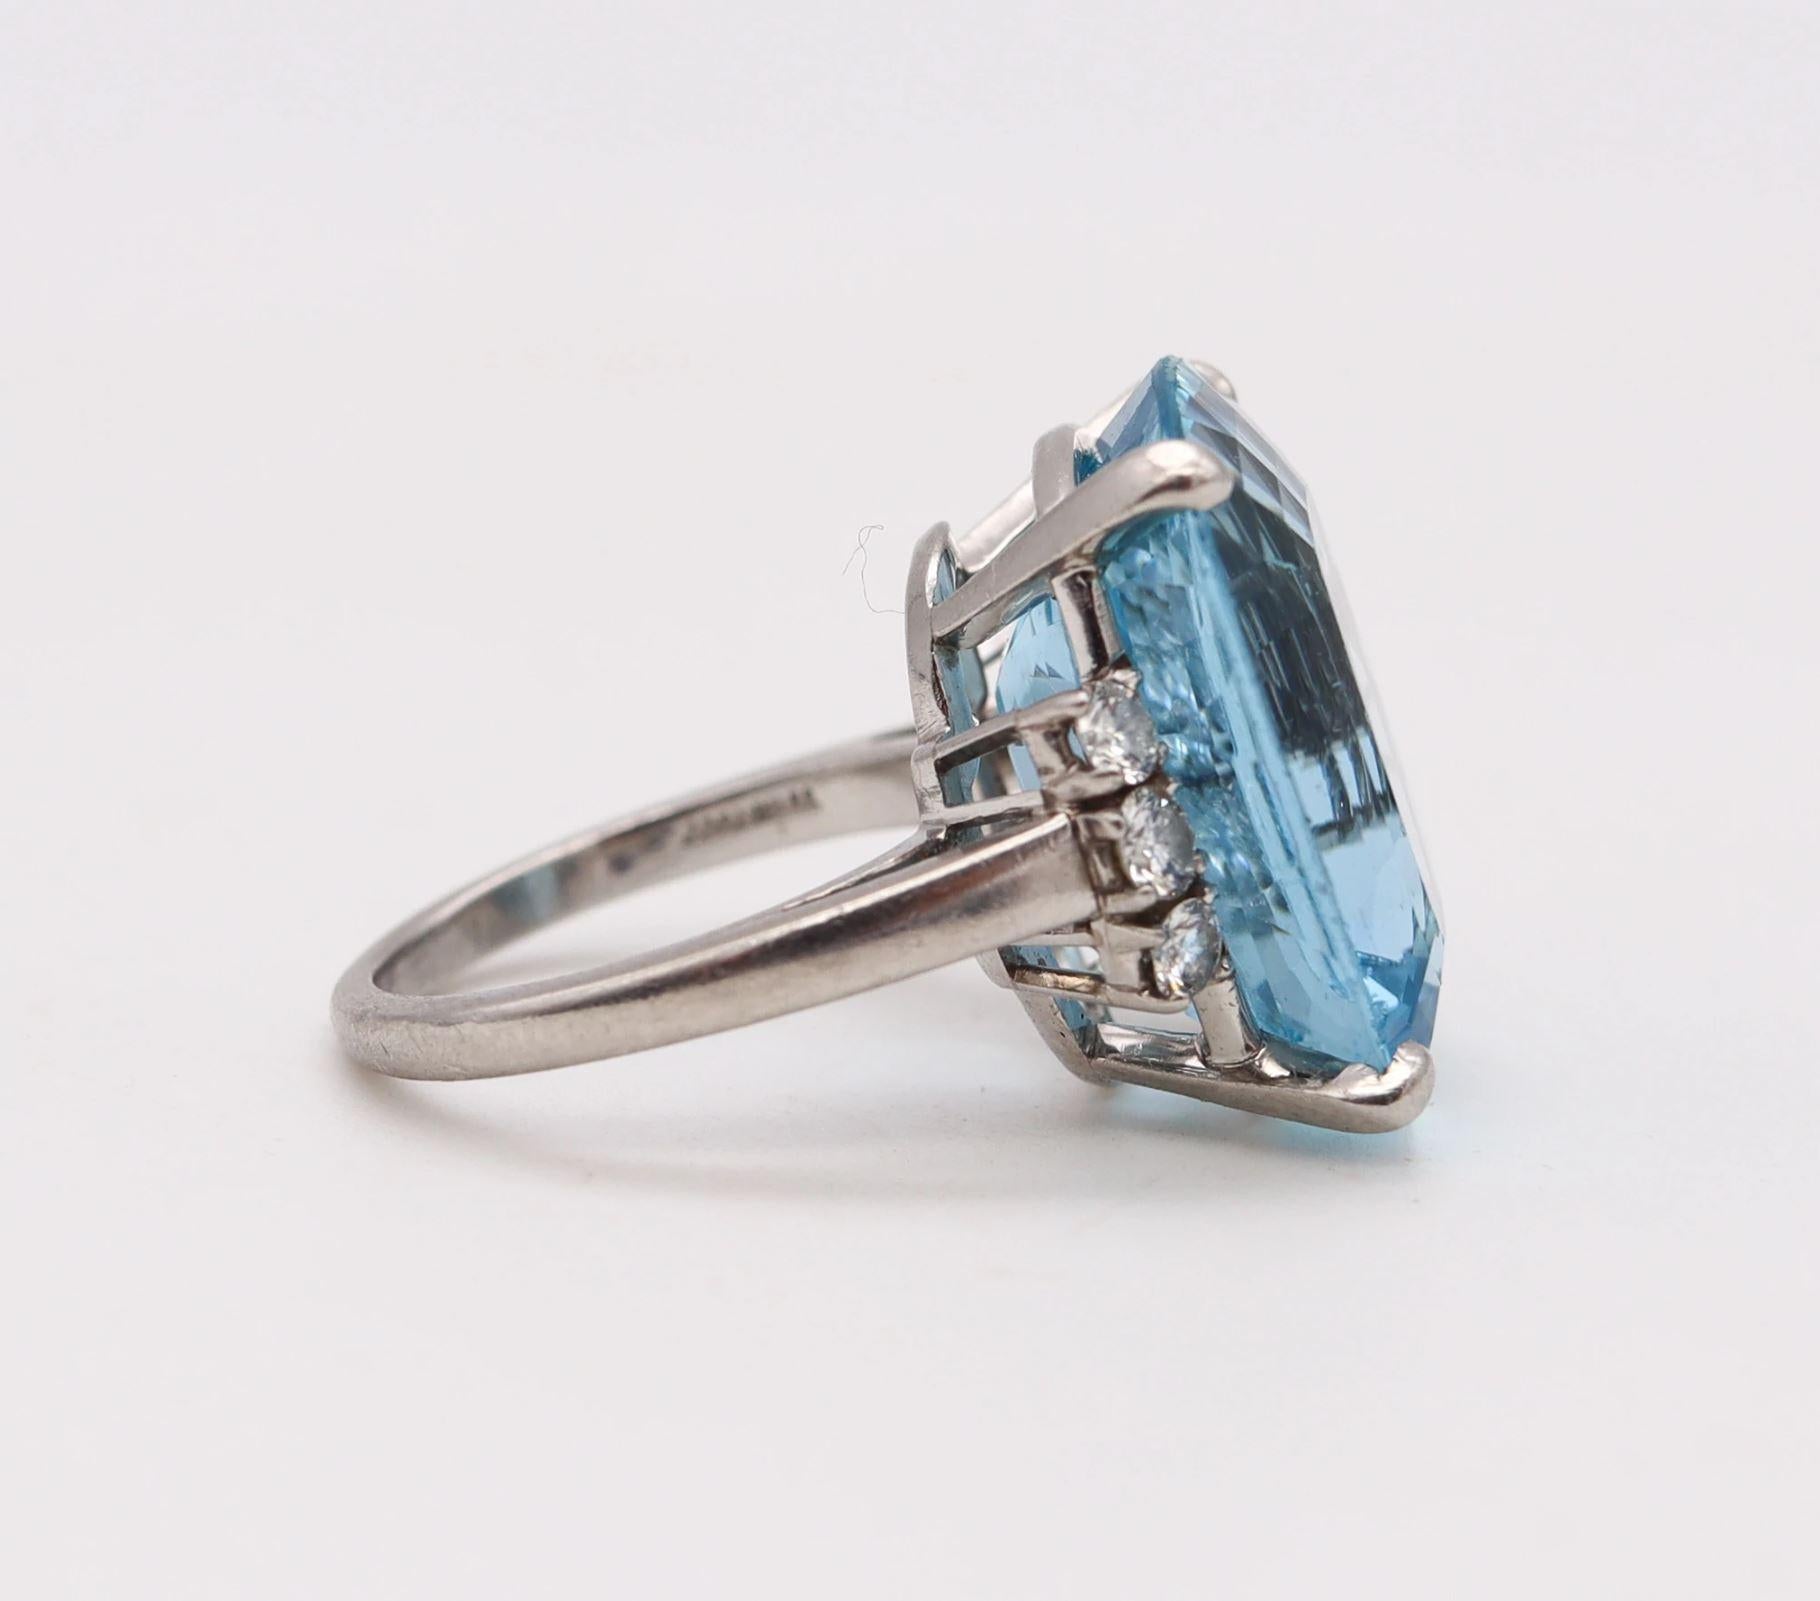 Modernist Tiffany & Co. GIA Certified 1960 Cocktail Ring Platinum with 19.17 Ct Aquamarine